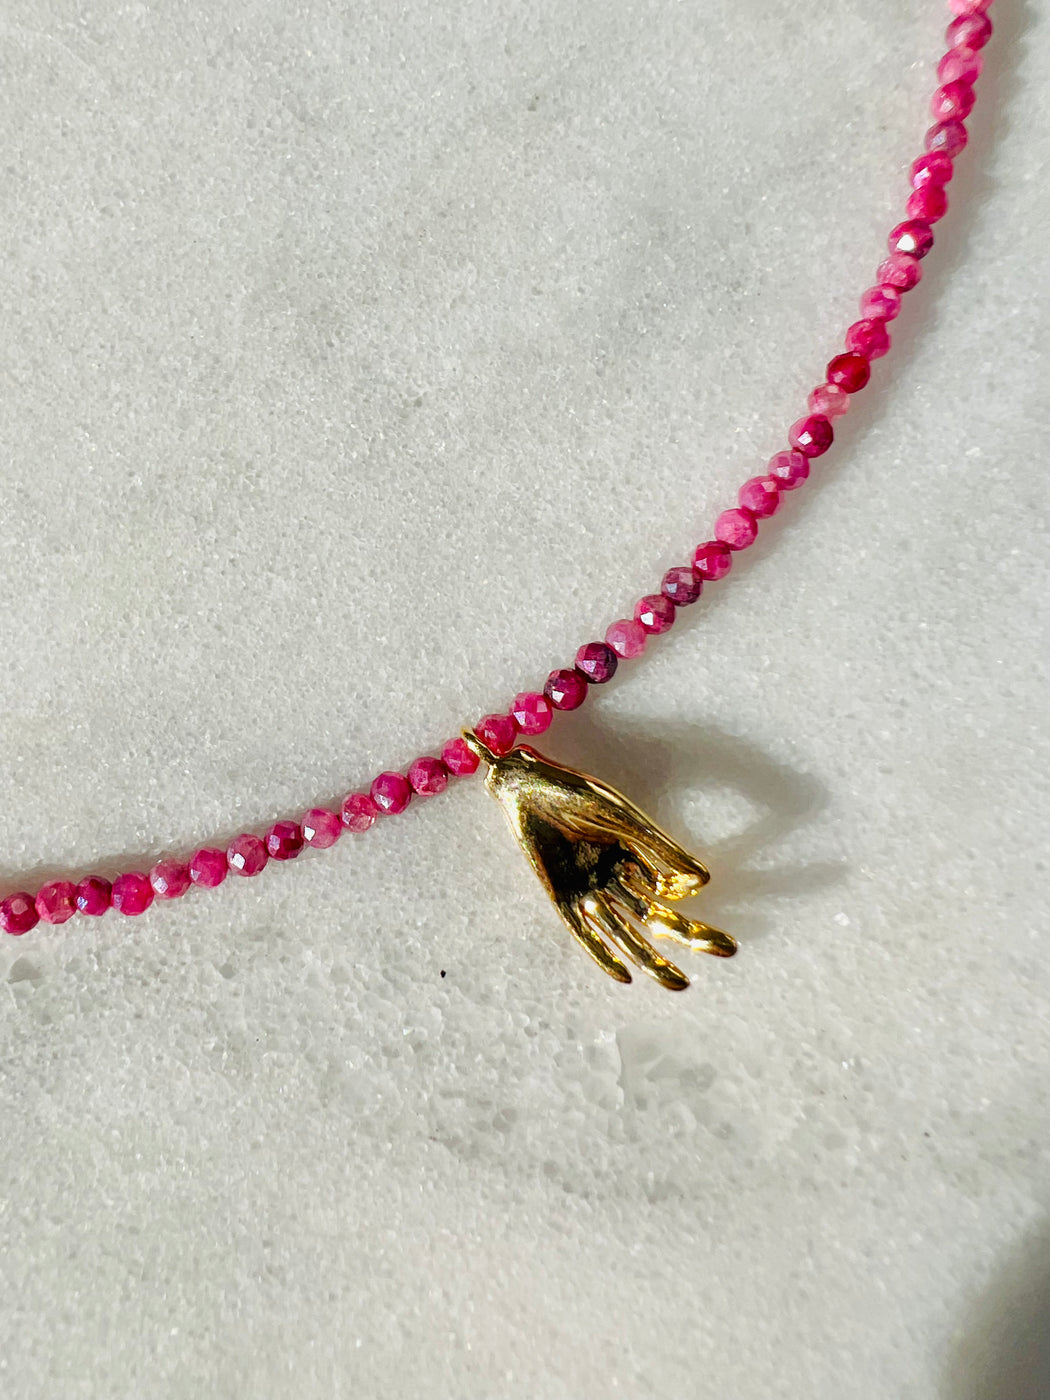  Ruby’s empowering, protective energy encourages you to move forward without fear while knocking down your goals, one after the other.Gyan mudra, aka the mudra of knowledge, stimulates the air and ether within you to activate your higher consciousness. The pink sapphire beads in this necklace reinforce this intention with loving devotion. designed by Carrie Marill